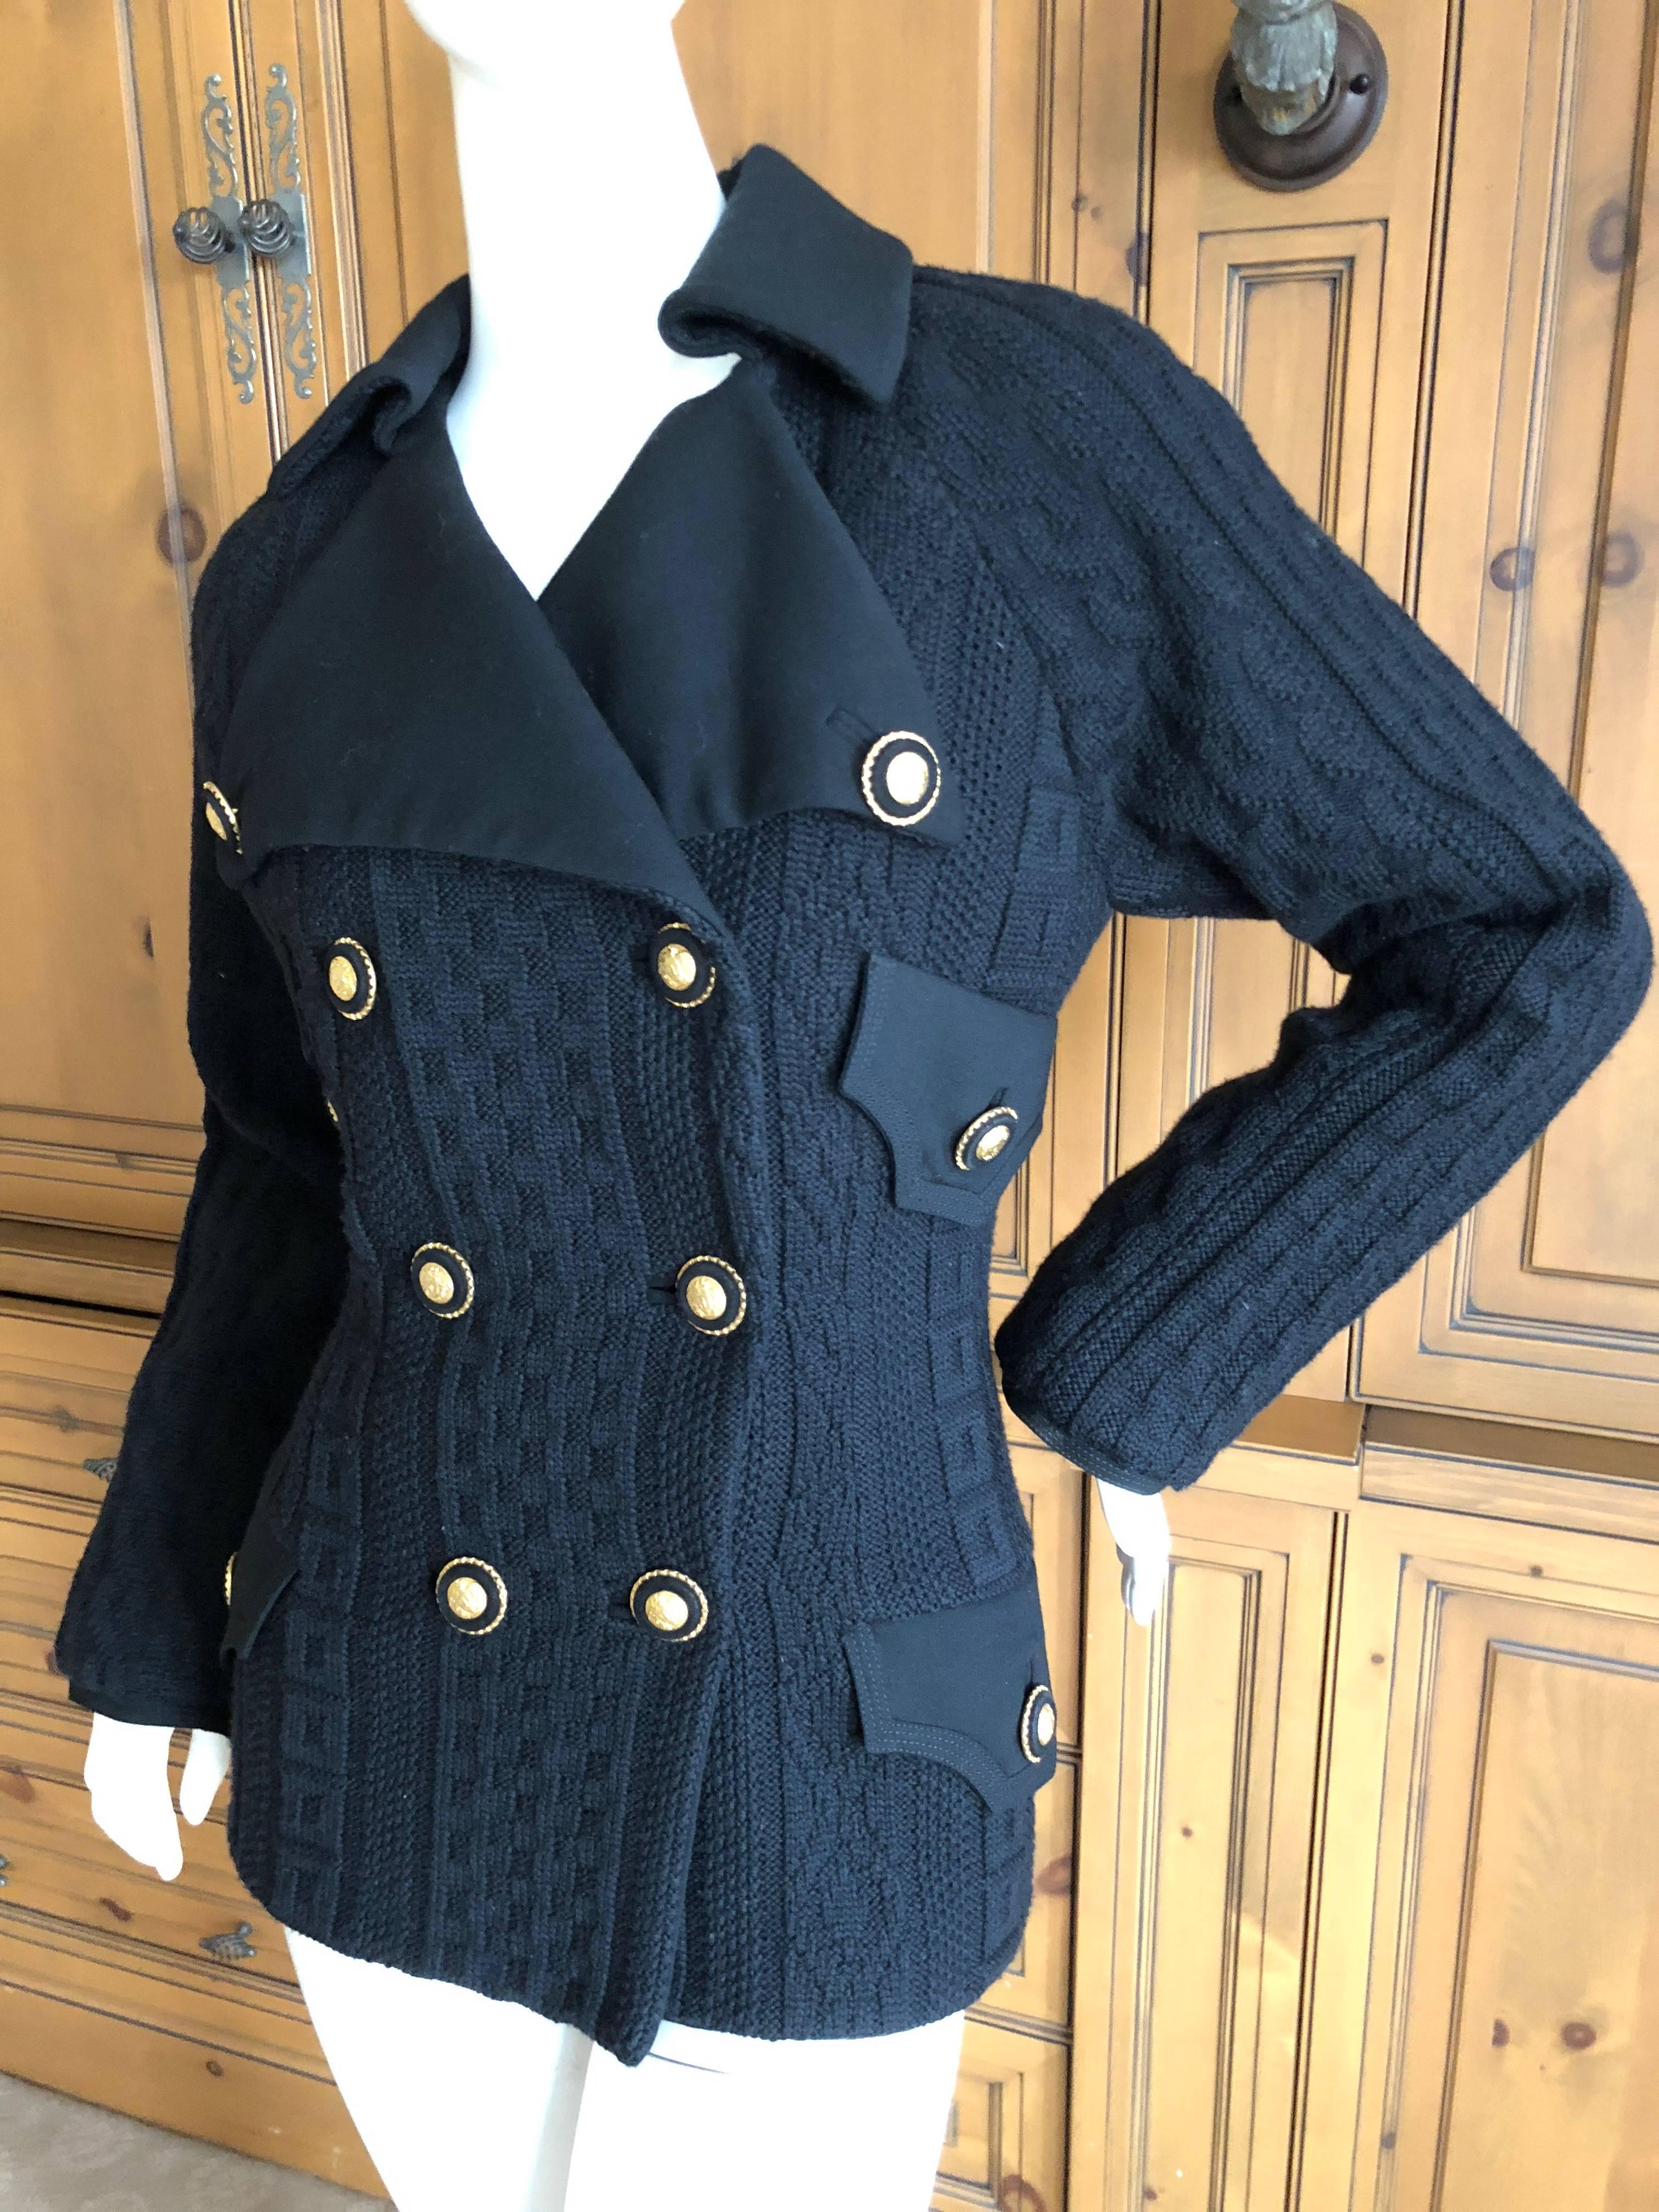 Women's Gianni Versace Couture 1980's Black Knit Jacket with Medusa Buttons